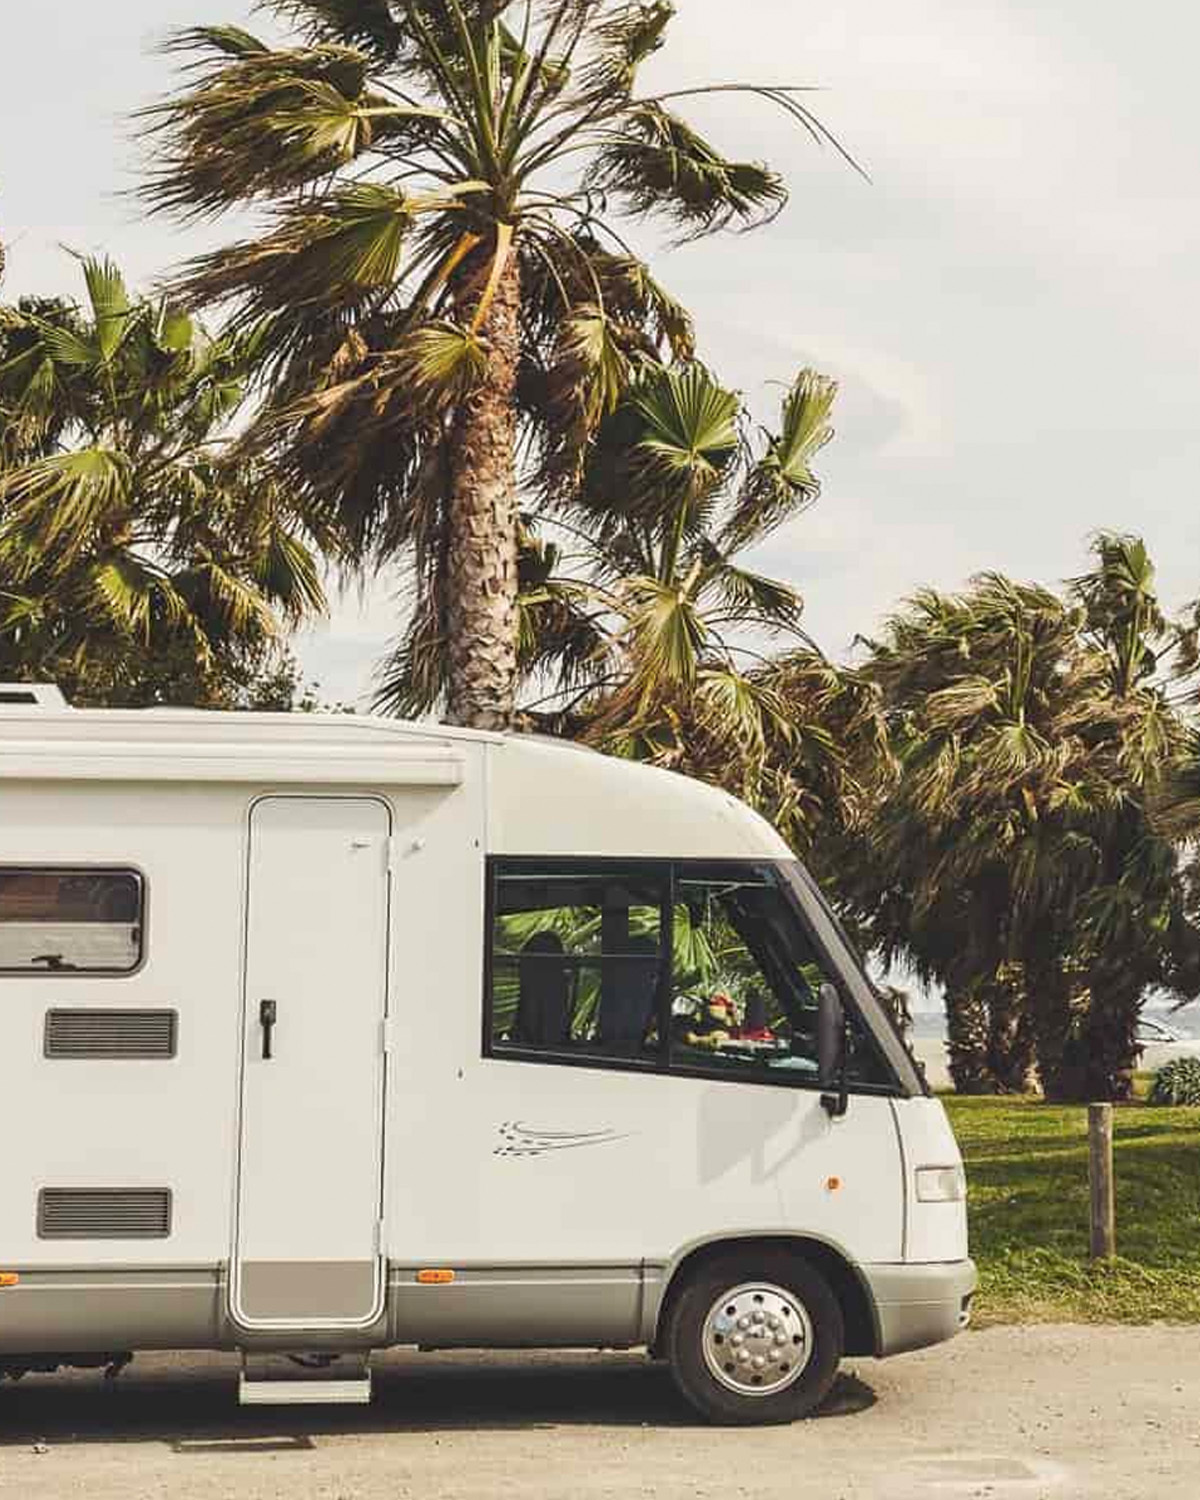 Free Camping in Europe With Your Motorhome